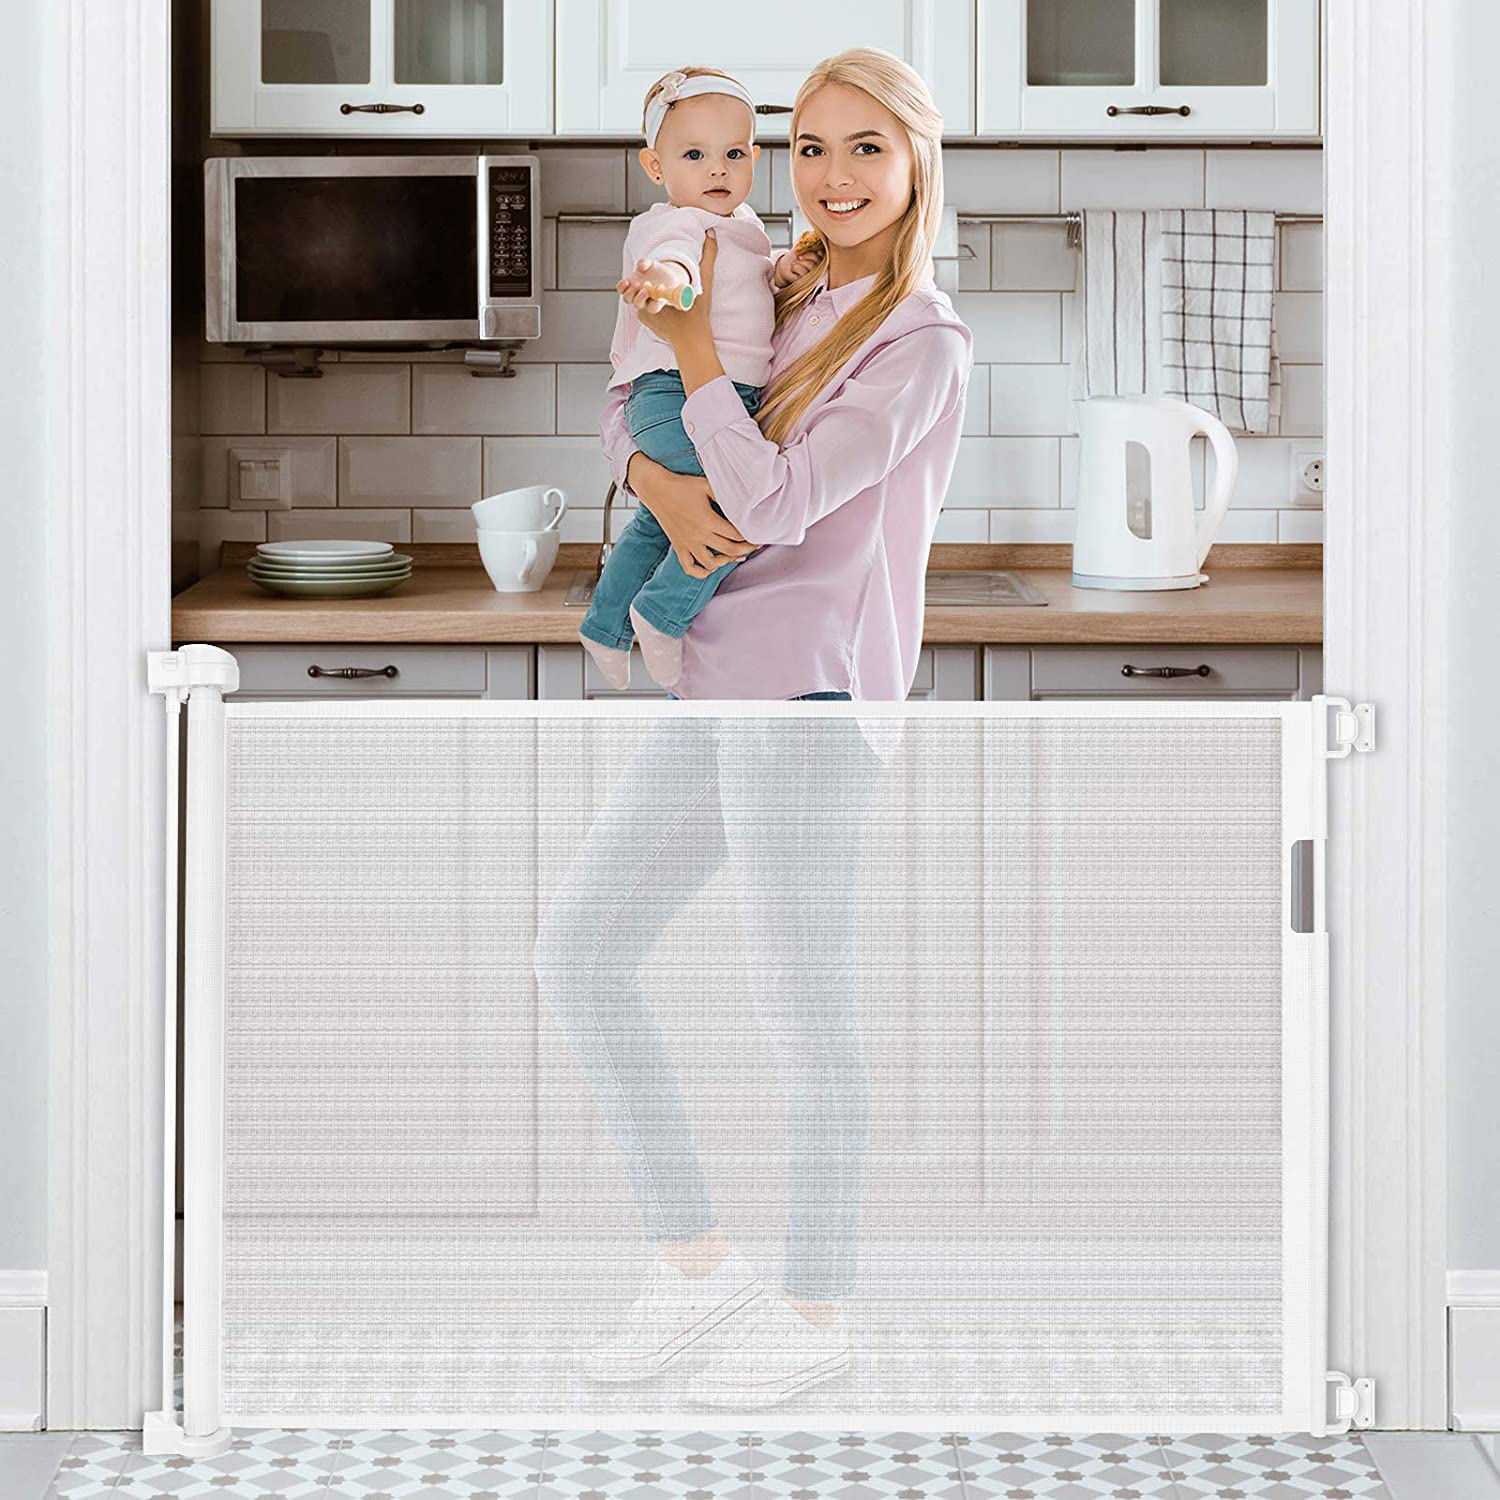 10 Best Retractable Baby Gates For Stairs 2022 [Latest Updated]